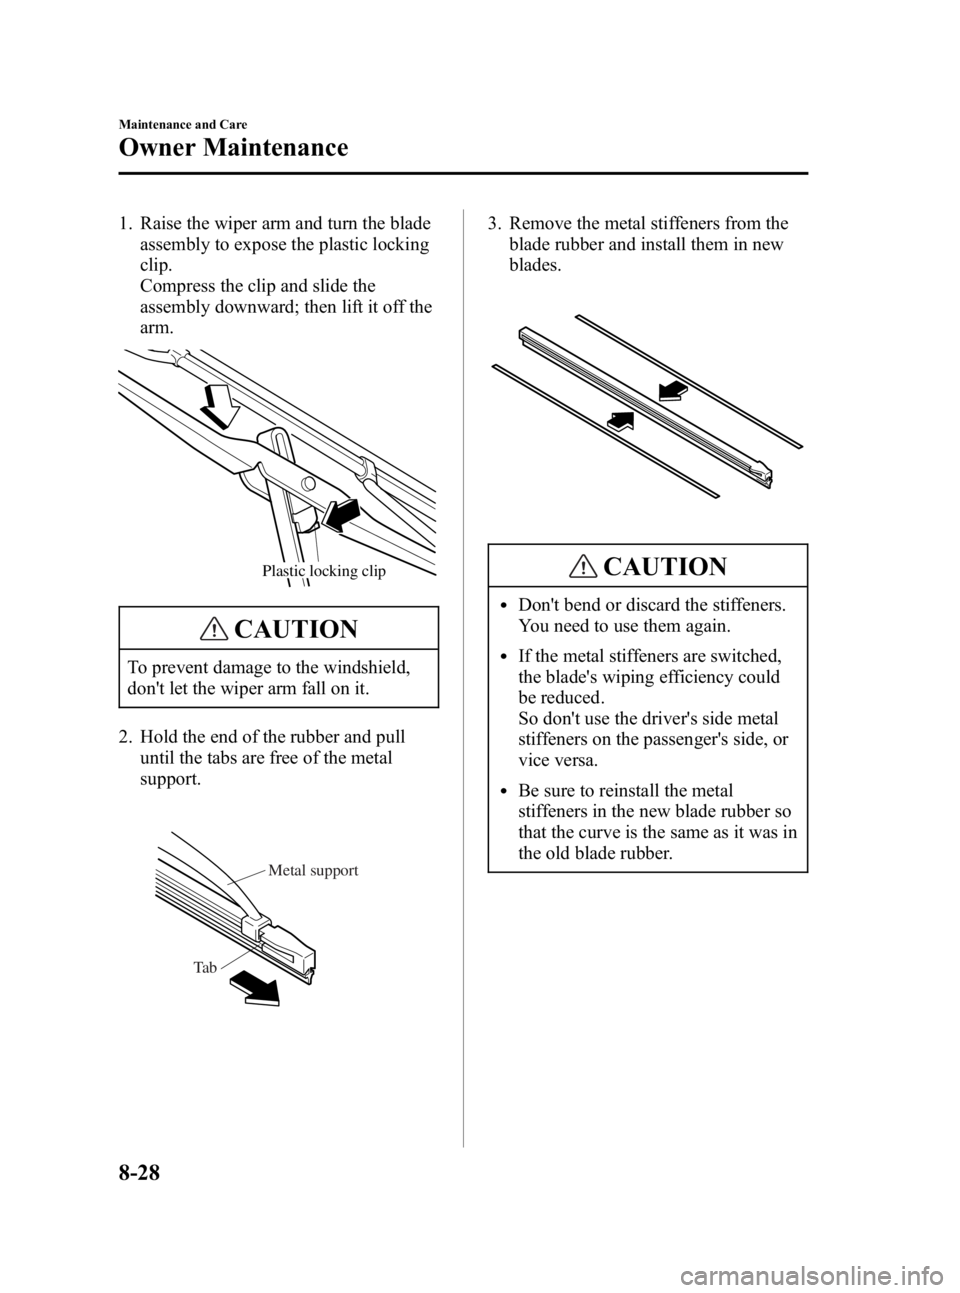 MAZDA MODEL MX-5 MIATA 2005  Owners Manual Black plate (244,1)
1. Raise the wiper arm and turn the bladeassembly to expose the plastic locking
clip.
Compress the clip and slide the
assembly downward; then lift it off the
arm.
Plastic locking c